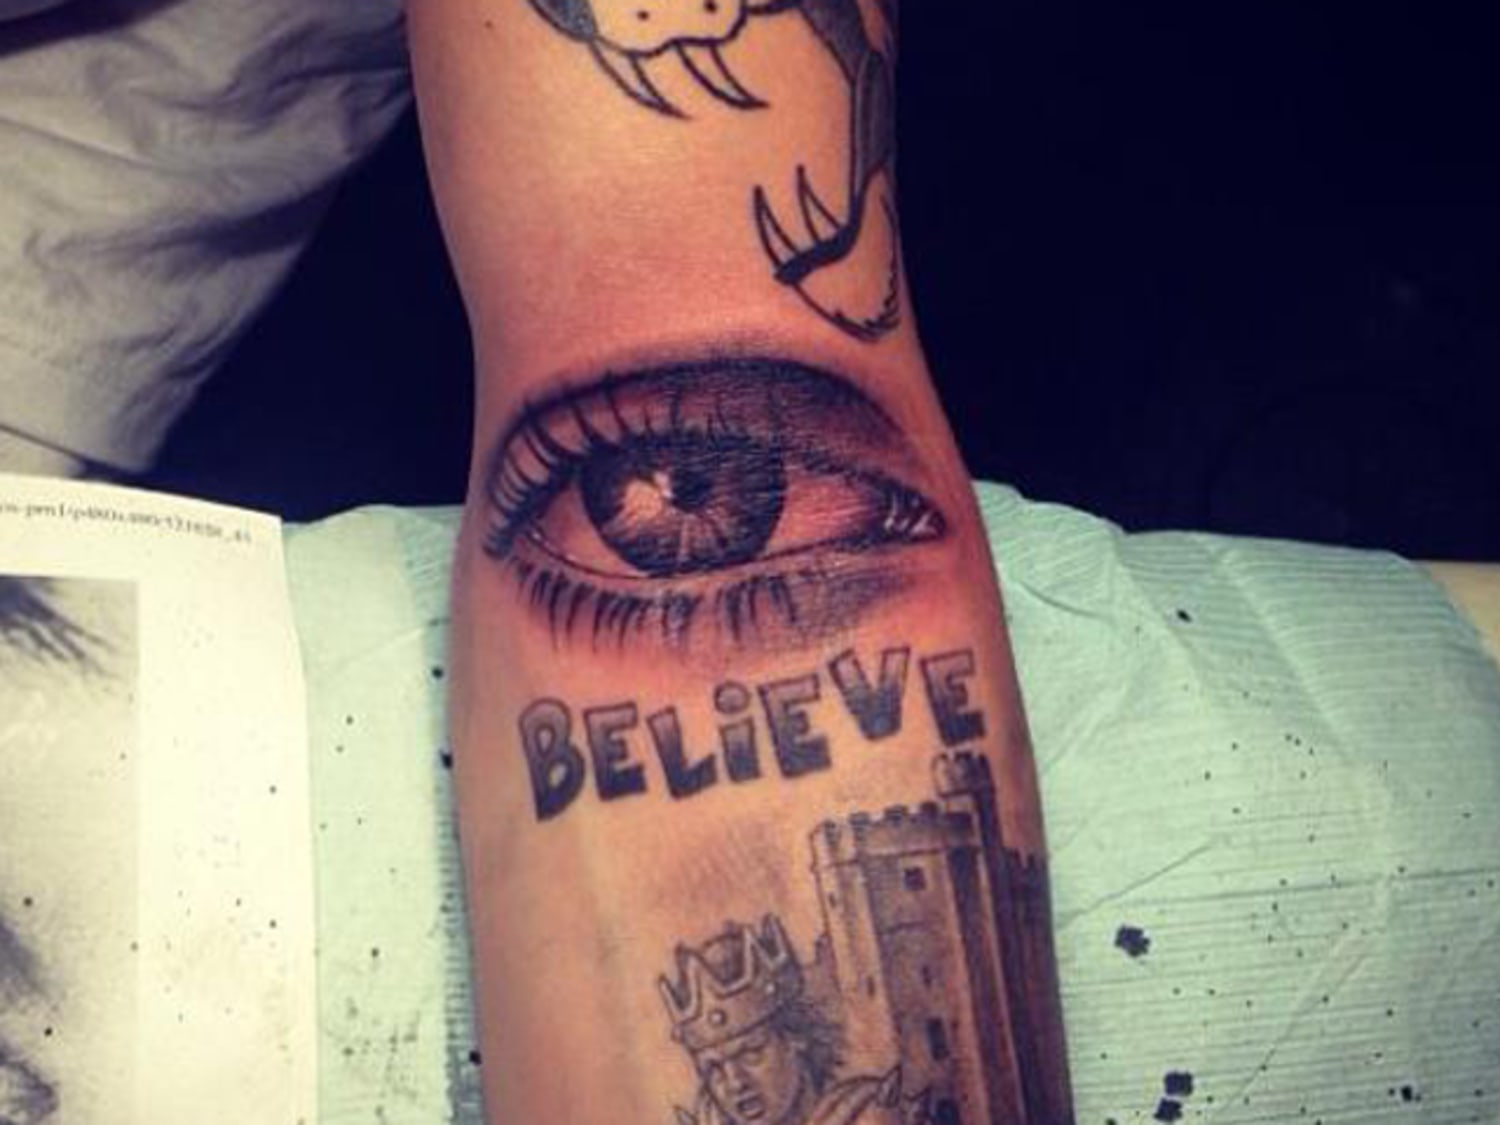 Justin Bieber tattoo images released by Miami police  BBC News